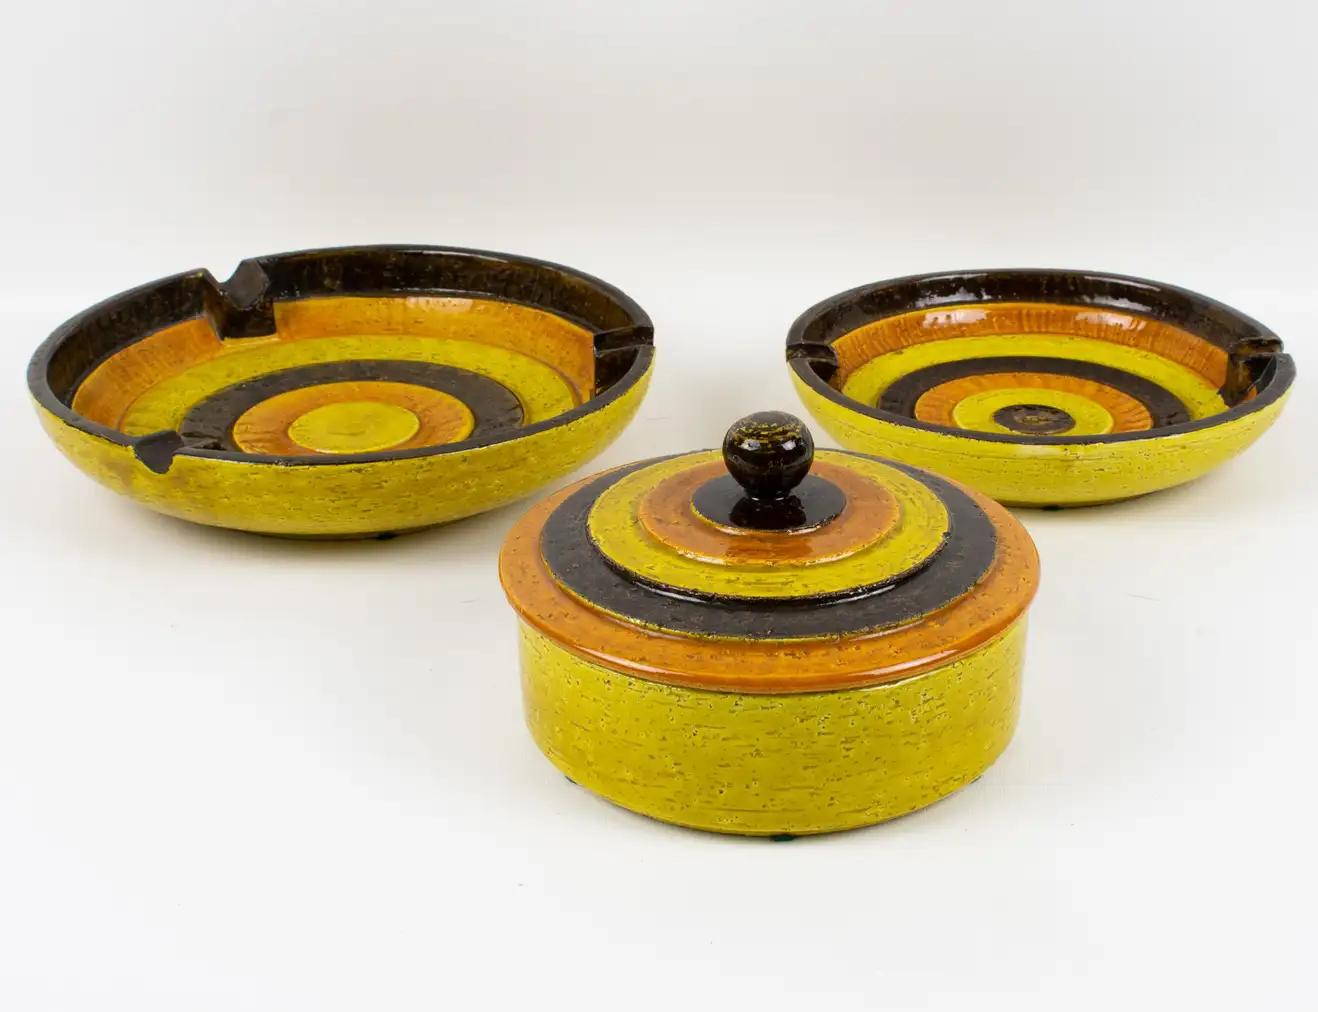 This is a striking 1960s Mid-Century Modern Aldo Londi for Bitossi ceramic set of three pieces, a box, and vide poche or catchalls. This set is imported and distributed in the United States by Rosenthal Netter. The trio features a round-lidded box,